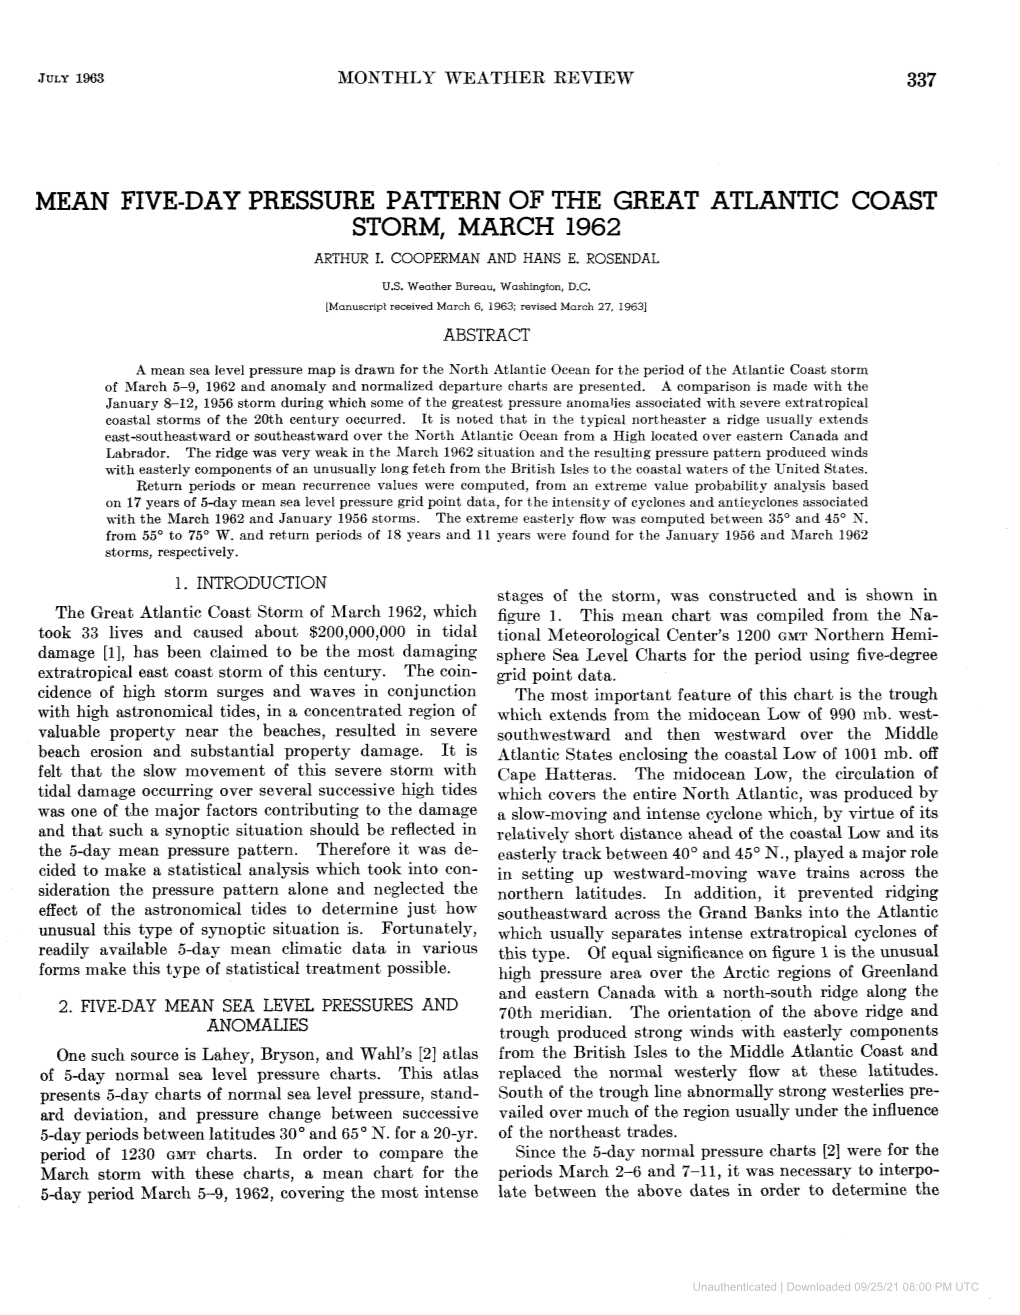 Mean Five-Day Pressure Pattern of the Great Atlantic Coast Storm, March 1962 Arthur I